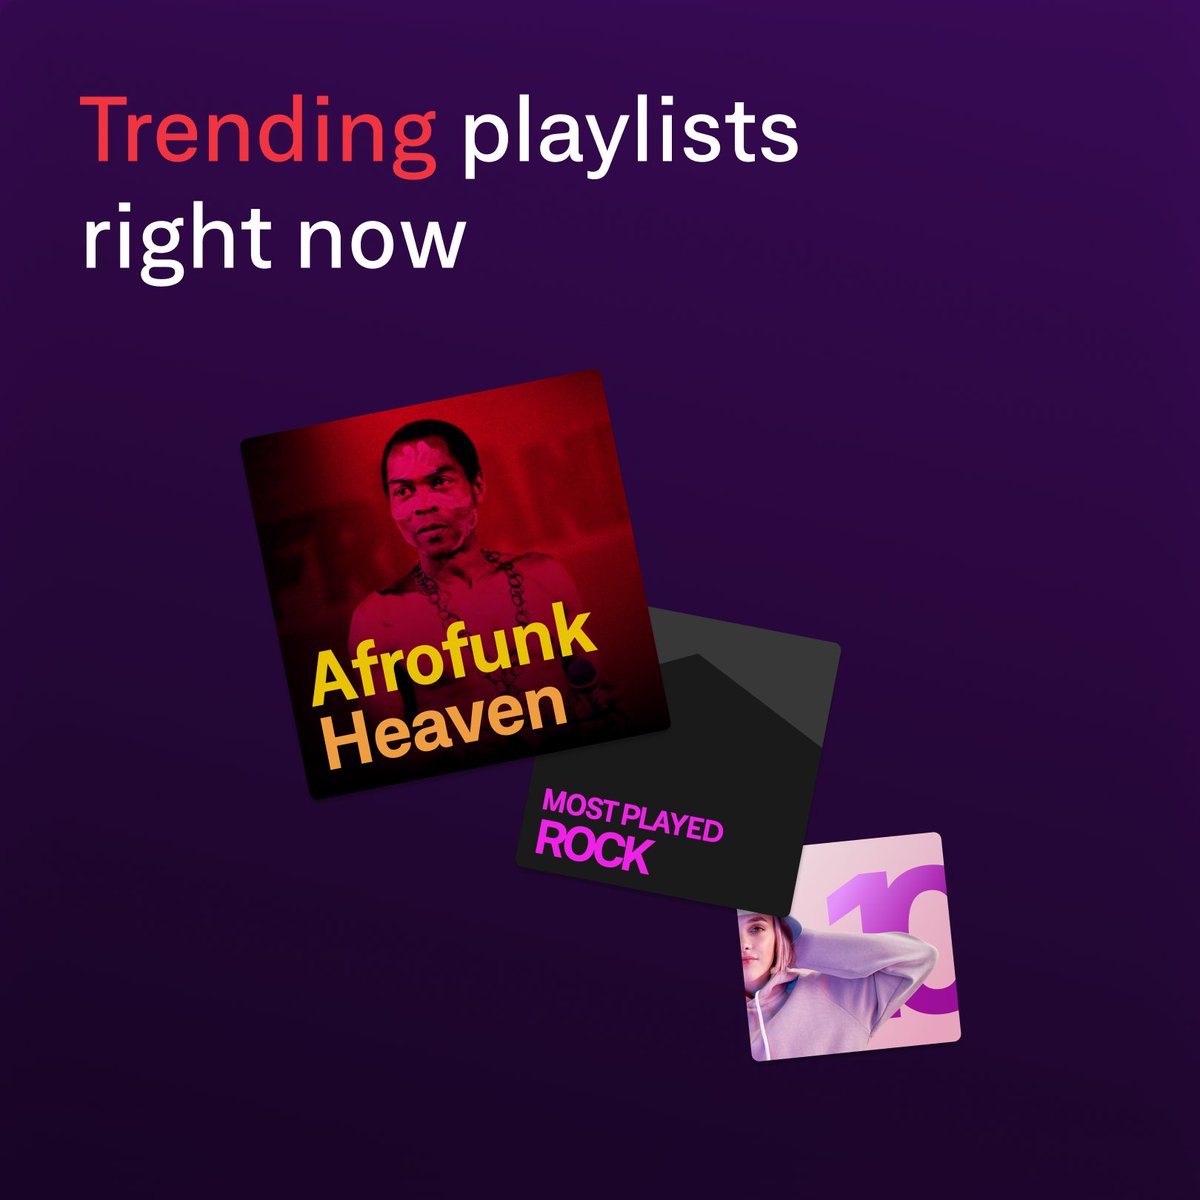 Let the popular sounds for business inspire your brand 🎵 Afrofunk Heaven, Most Played Rock, and Alternative 10s are the most trending playlists as of late. #MusicforBusiness #SoundtrackYourBrand